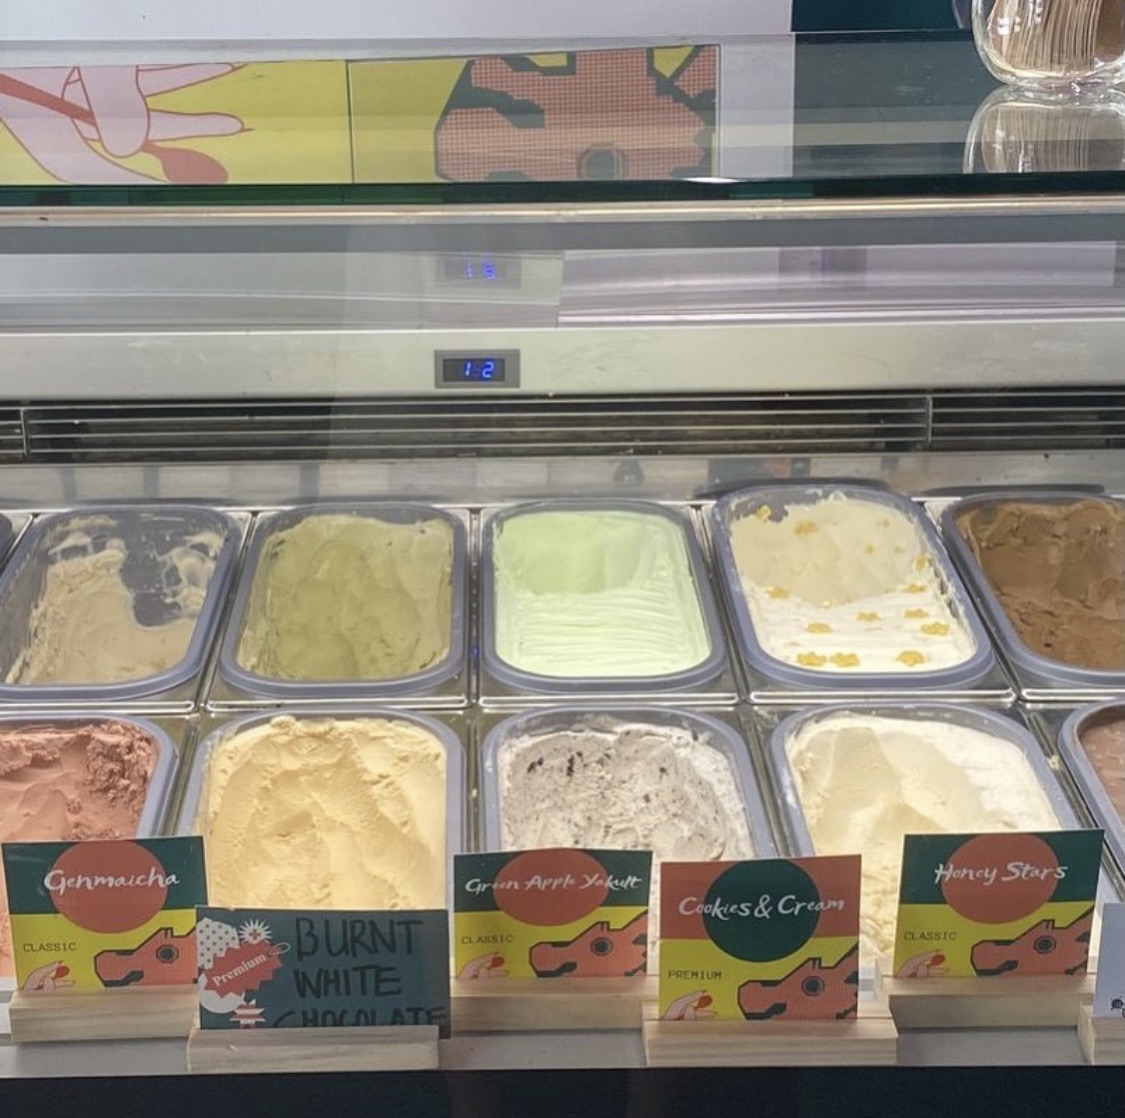 A variety of gelato flavours on display